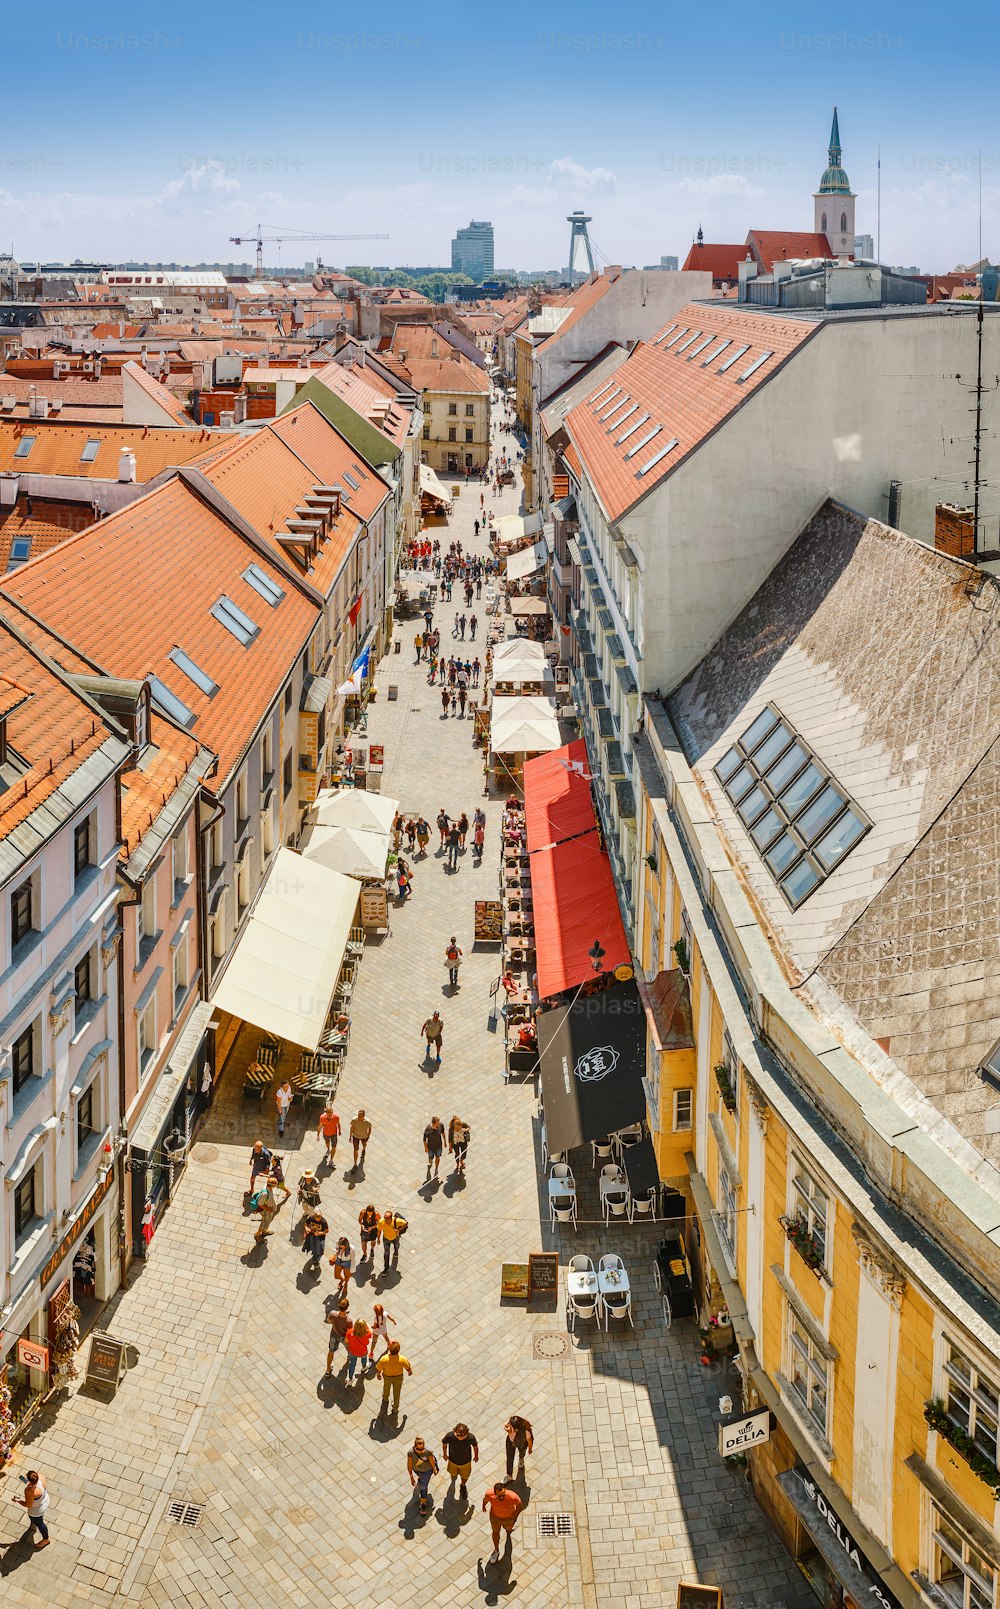 Panoramic view of the roofs and the old town from a height, tourism attractions in Bratislava concept